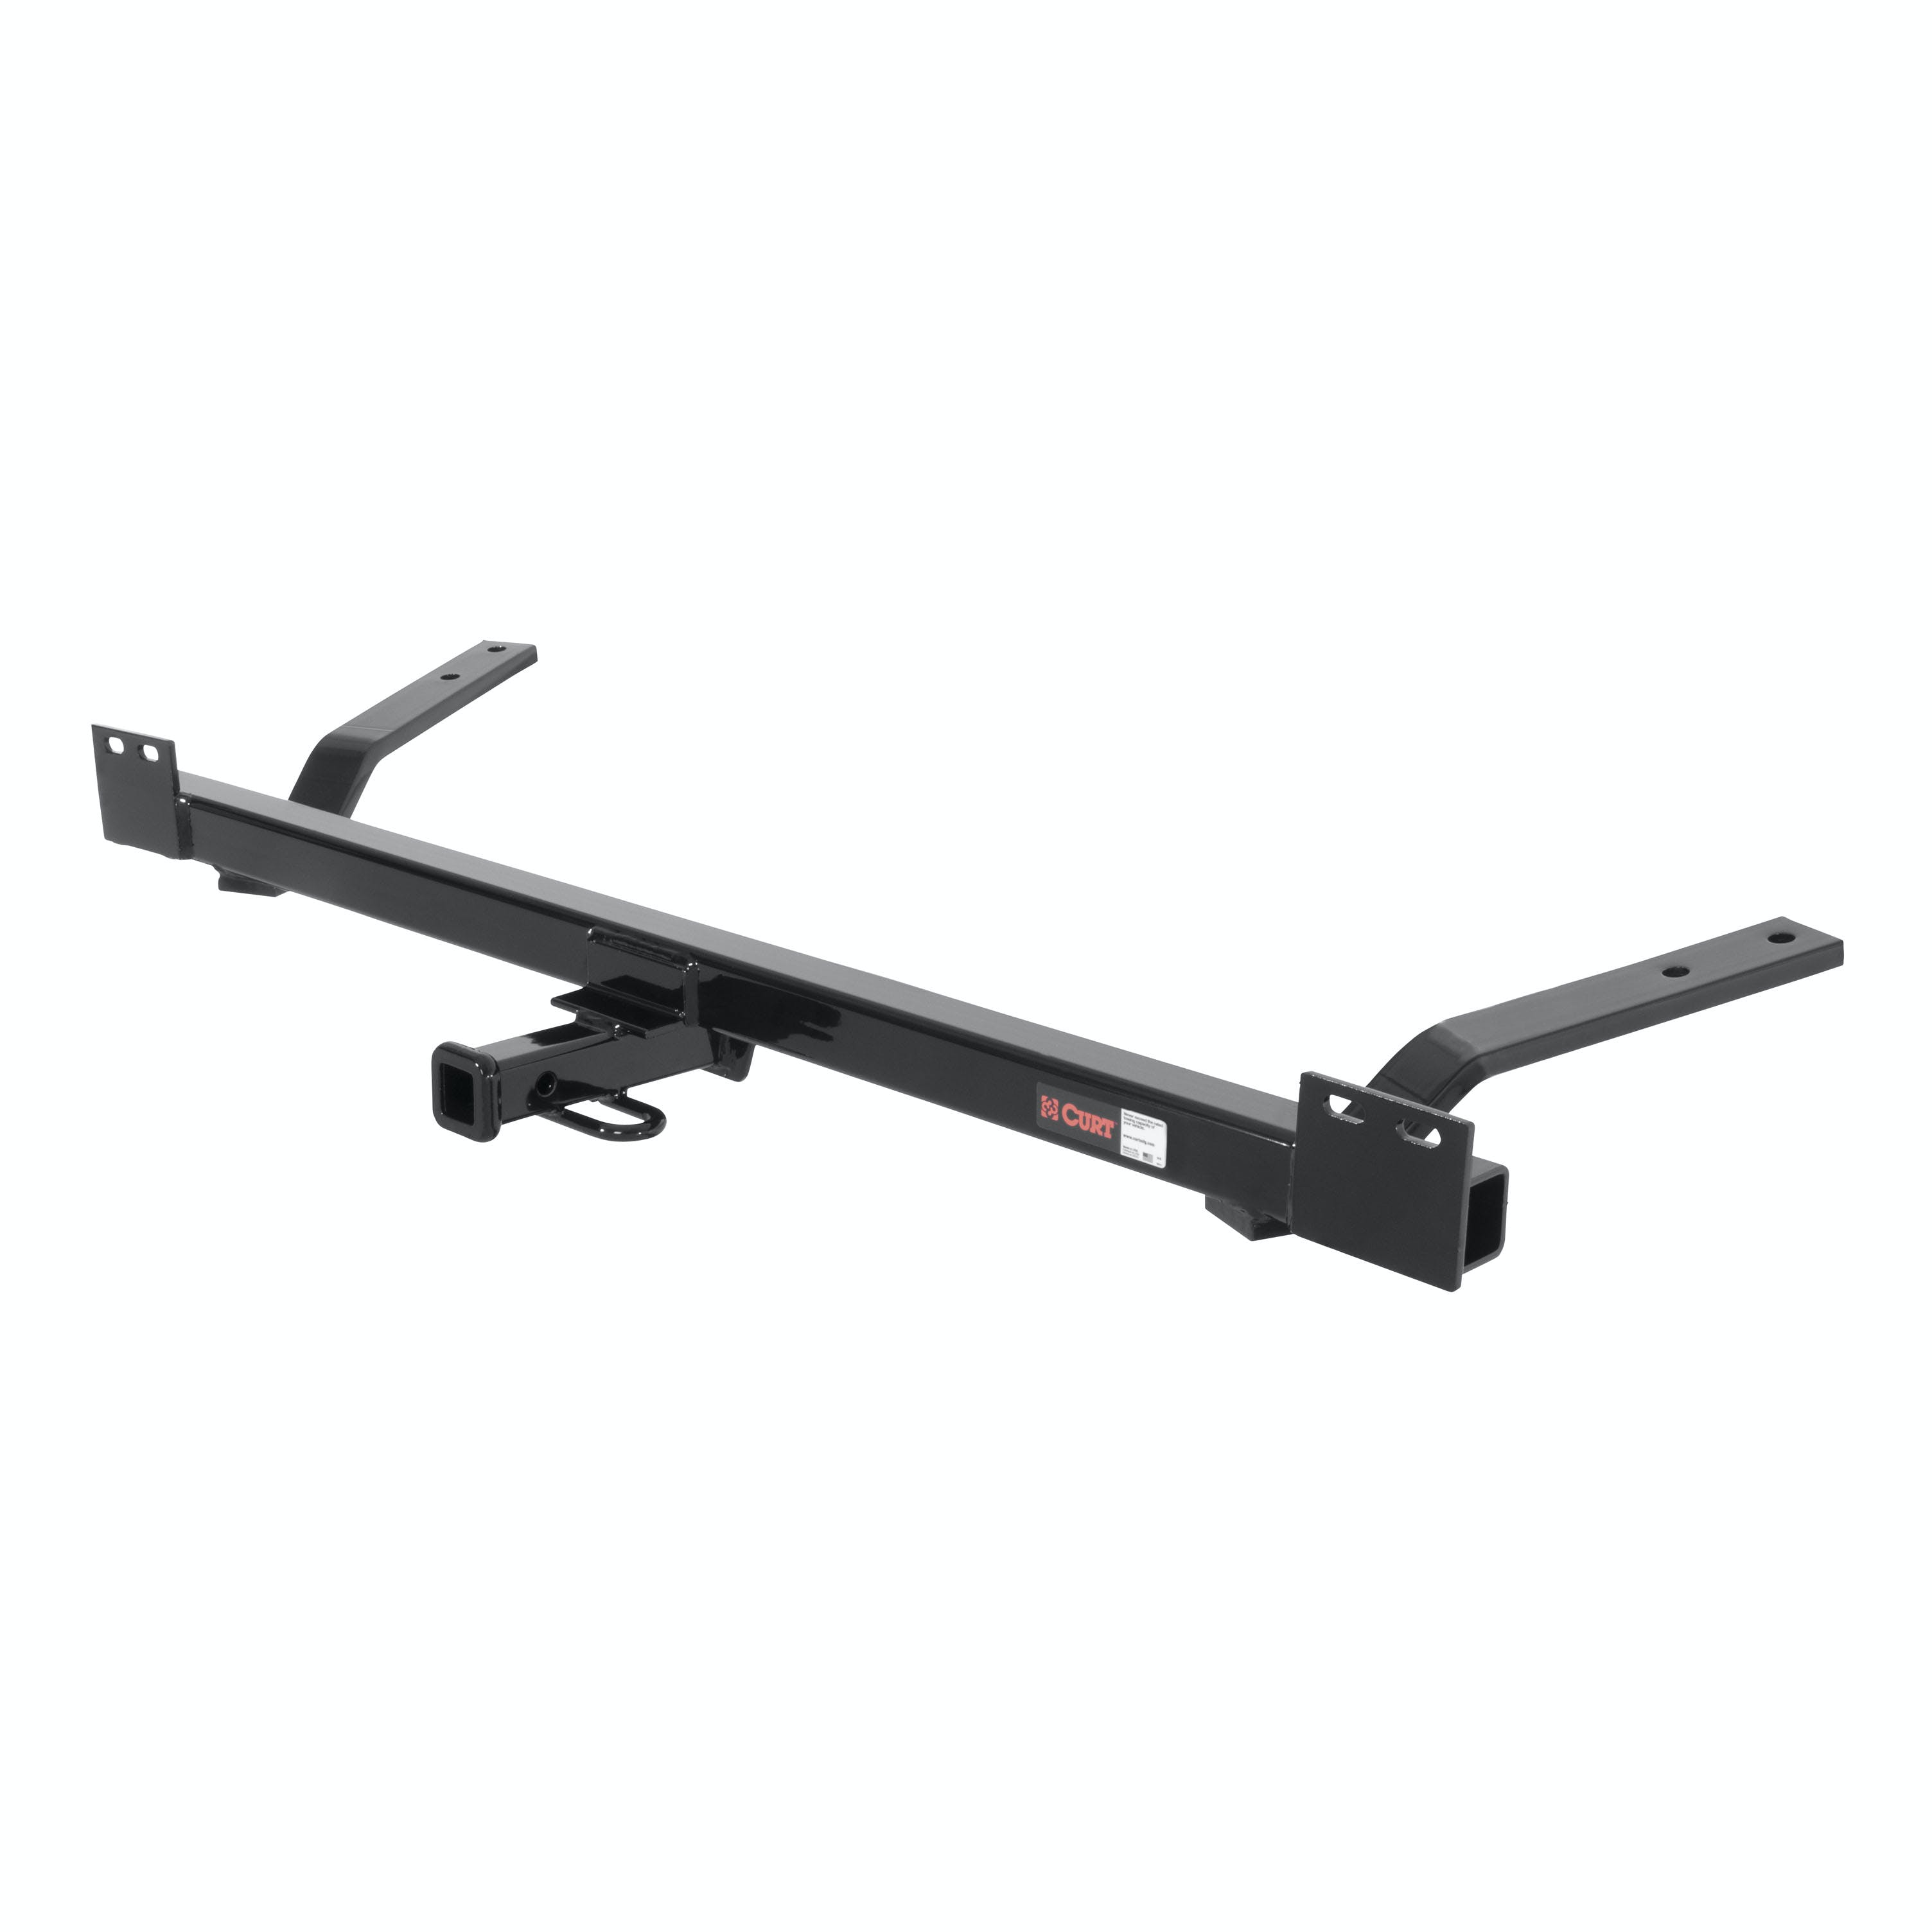 CURT 12041 Class 2 Hitch, 1-1/4, Select Buick, Chevrolet, Oldsmobile, Pontiac (Concealed)